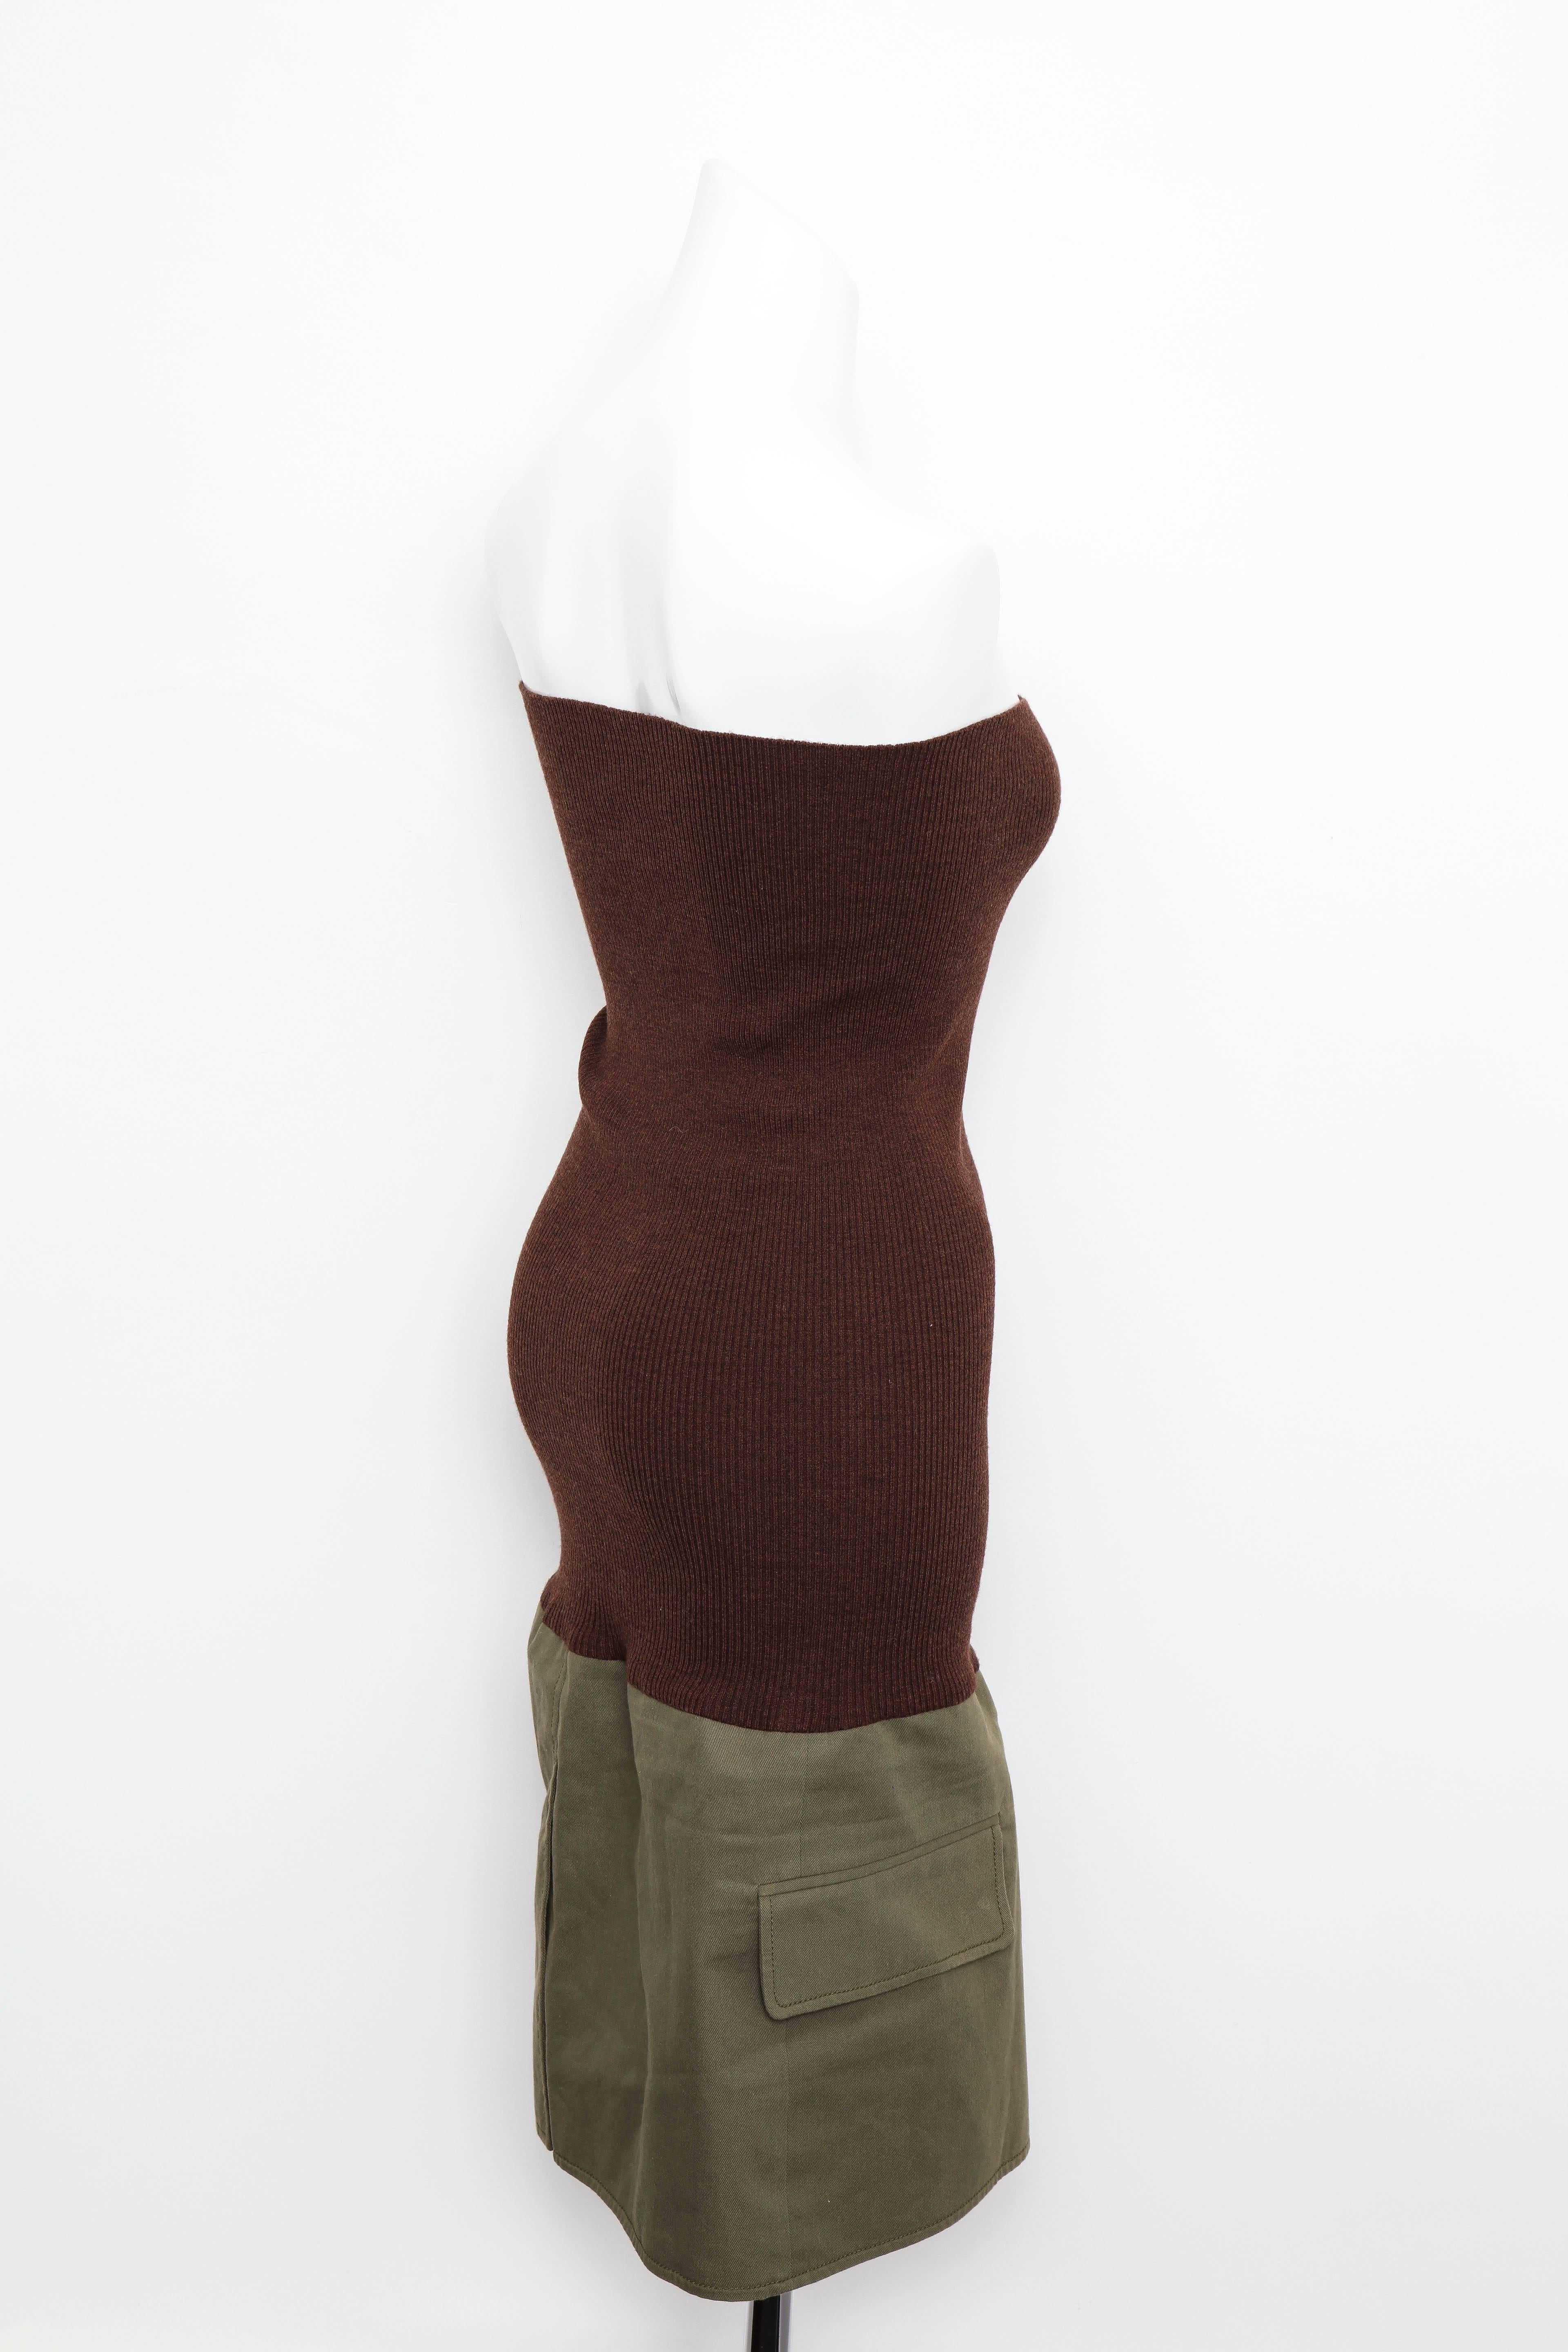 Christian Dior by John Galliano Knit Tube Dress In Excellent Condition For Sale In Chicago, IL